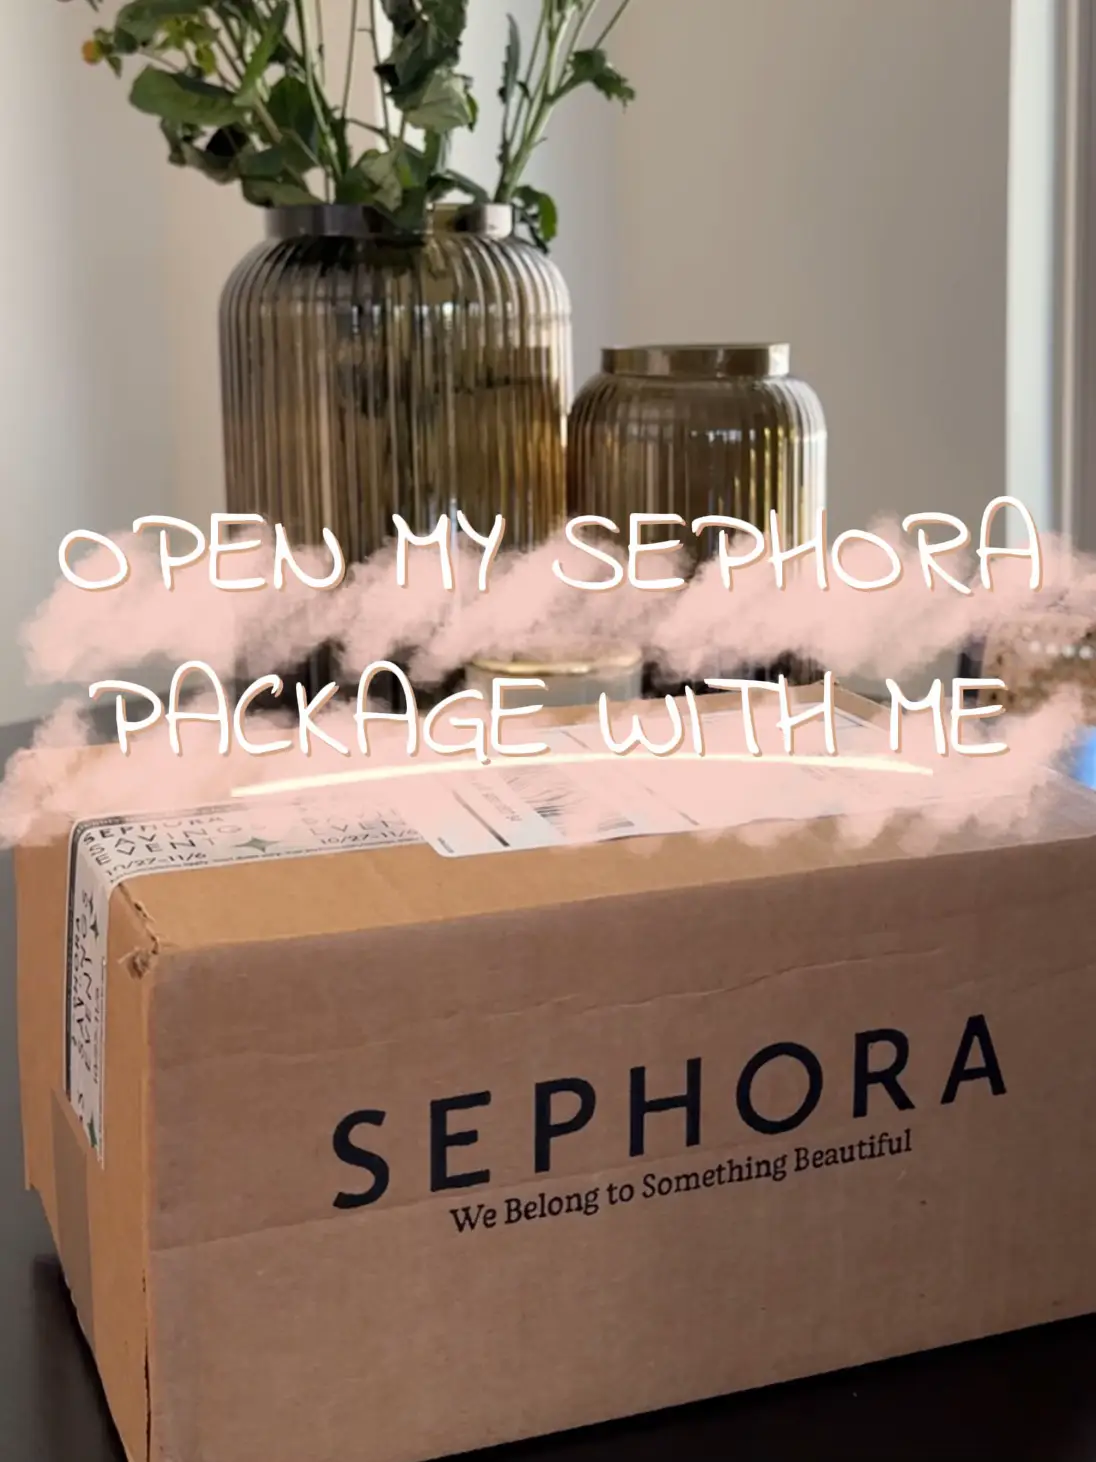 Open my Sephora package with me 🥰